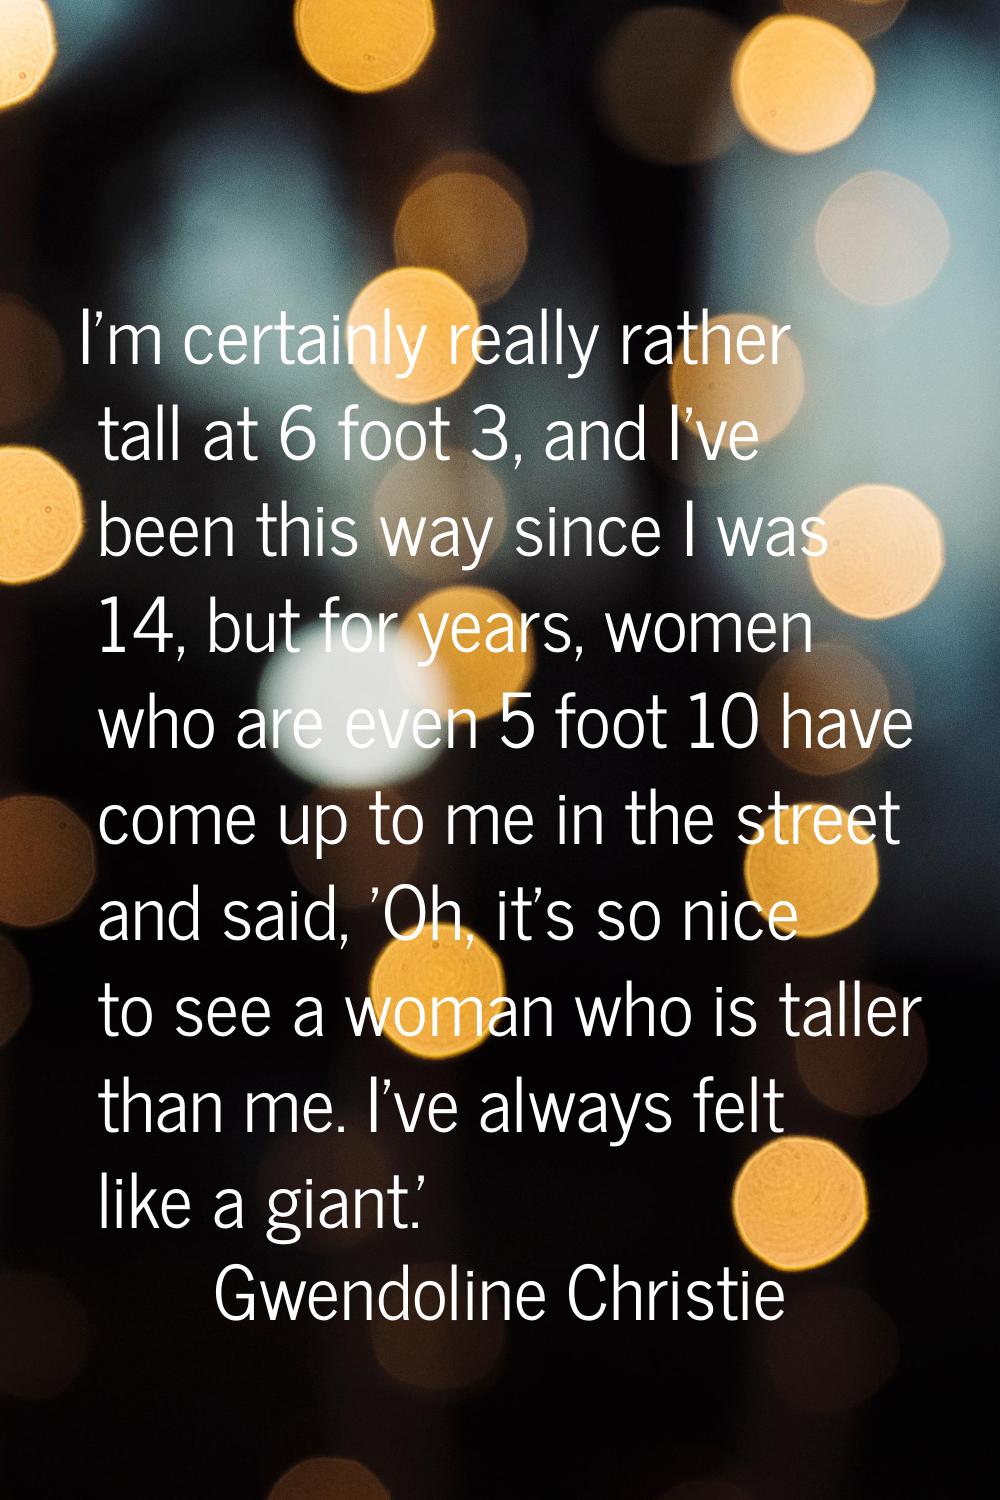 I'm certainly really rather tall at 6 foot 3, and I've been this way since I was 14, but for years,